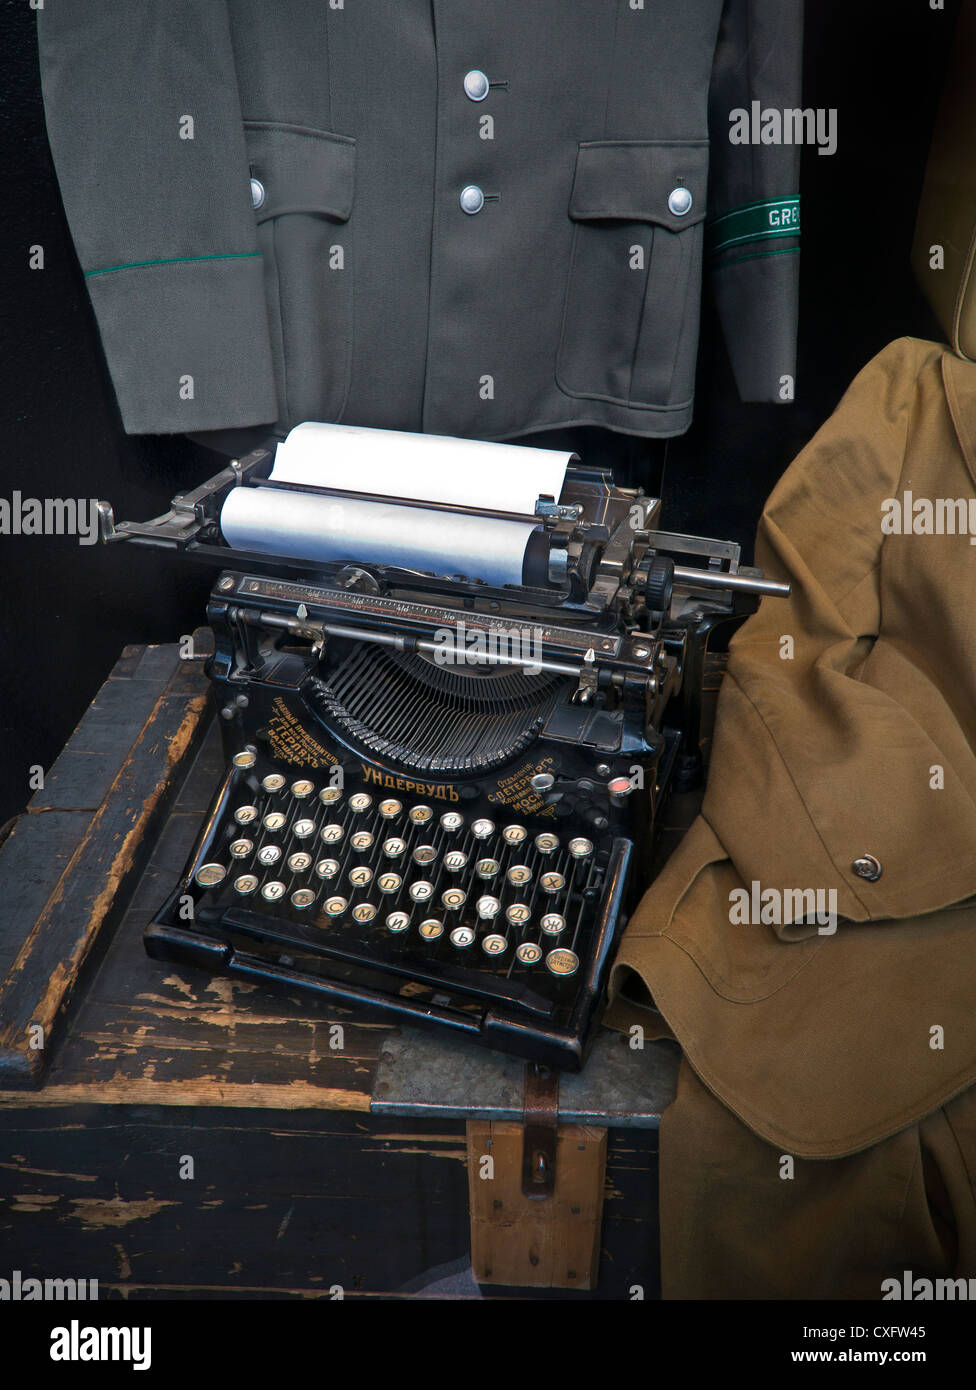 Old fashioned Russian typewriter with military uniforms displayed Stock Photo